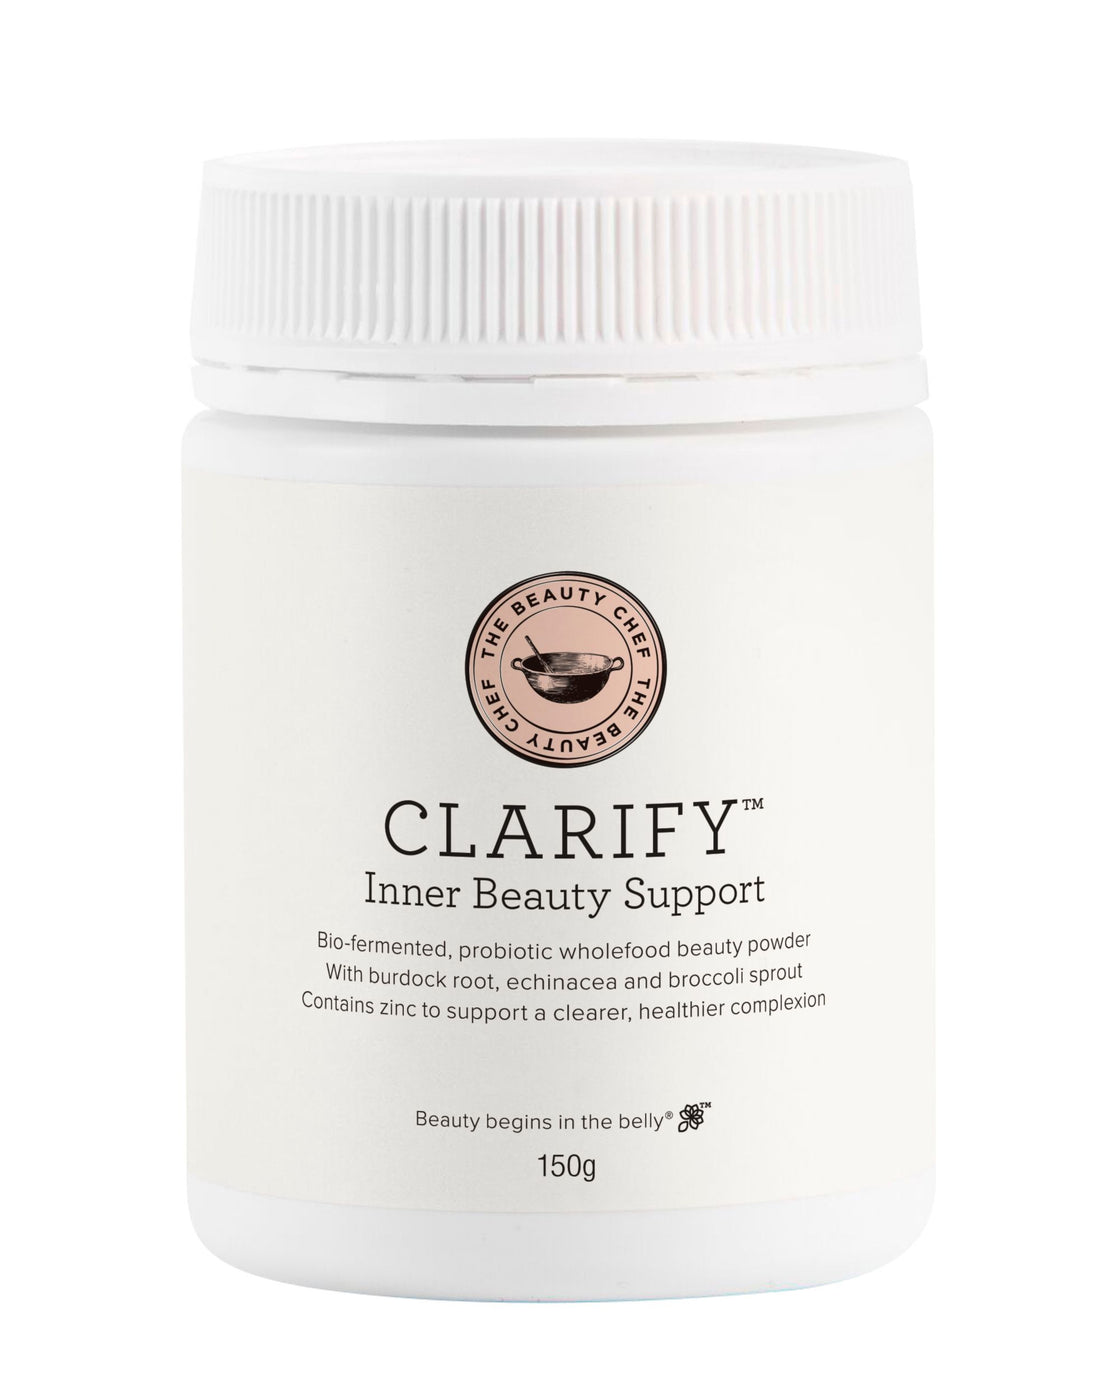 CLEAR SKIN™ Inner Beauty Support ( previously Clarify_